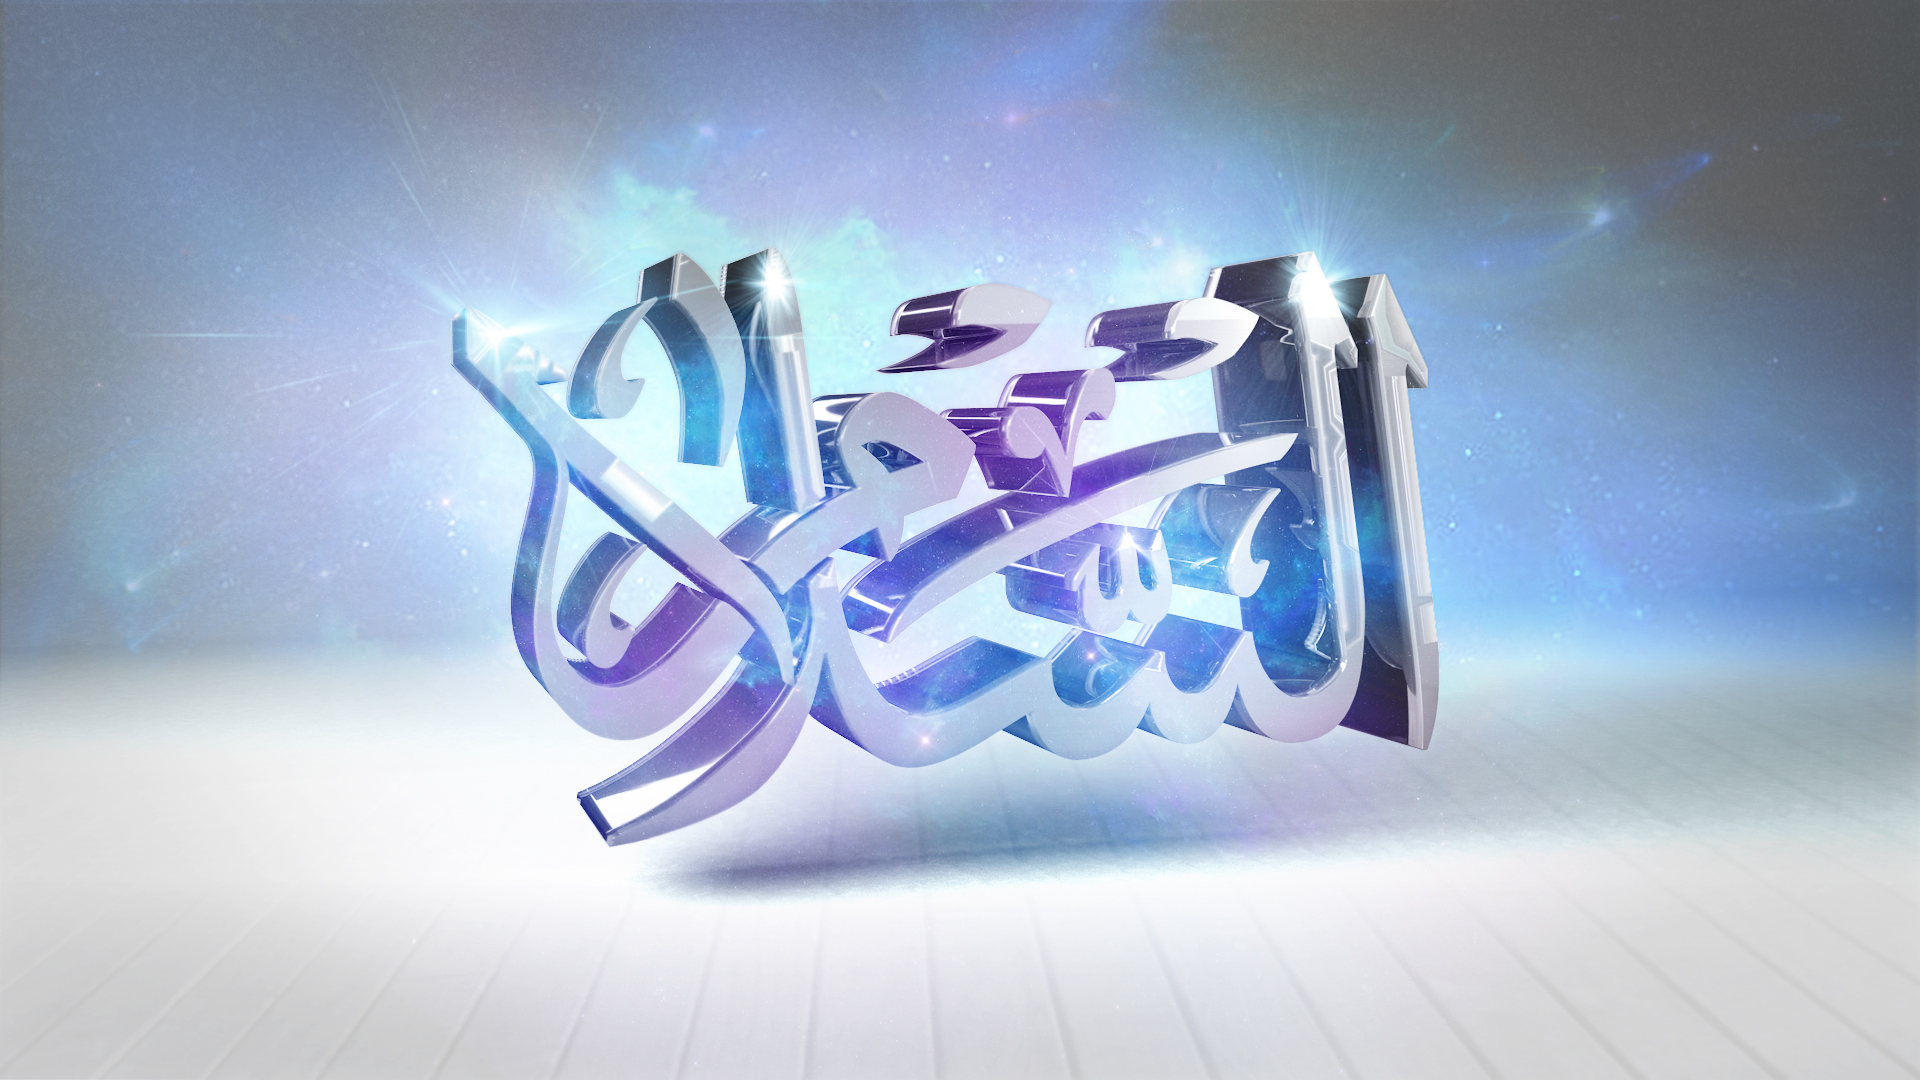  Calligraphy HD Wallpaper [1920 x 1080]   3D Calligraphy and Typography